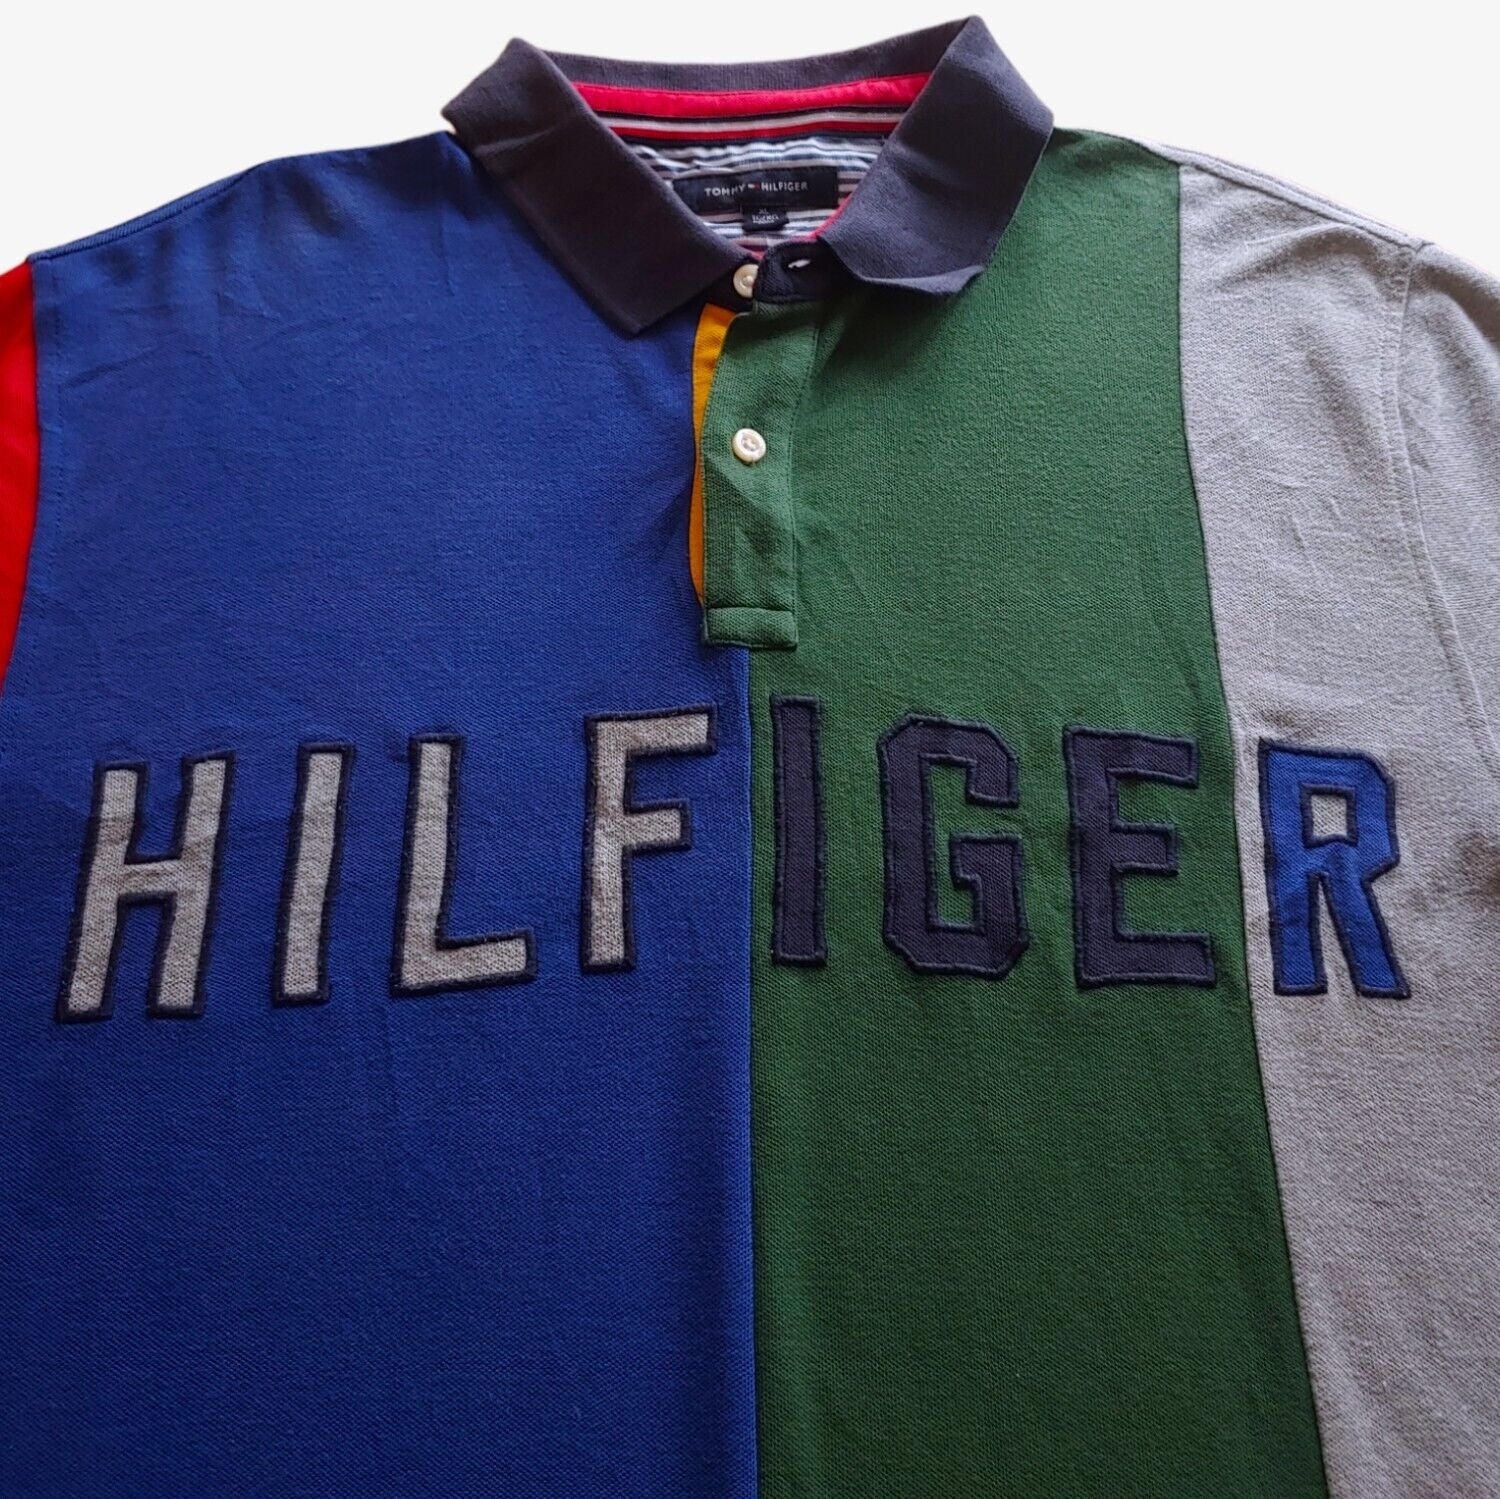 Vintage 1990s Tommy Hilfiger Colour Block Striped Polo With Chest Spell Out Logo Embroidered - Casspios Dream